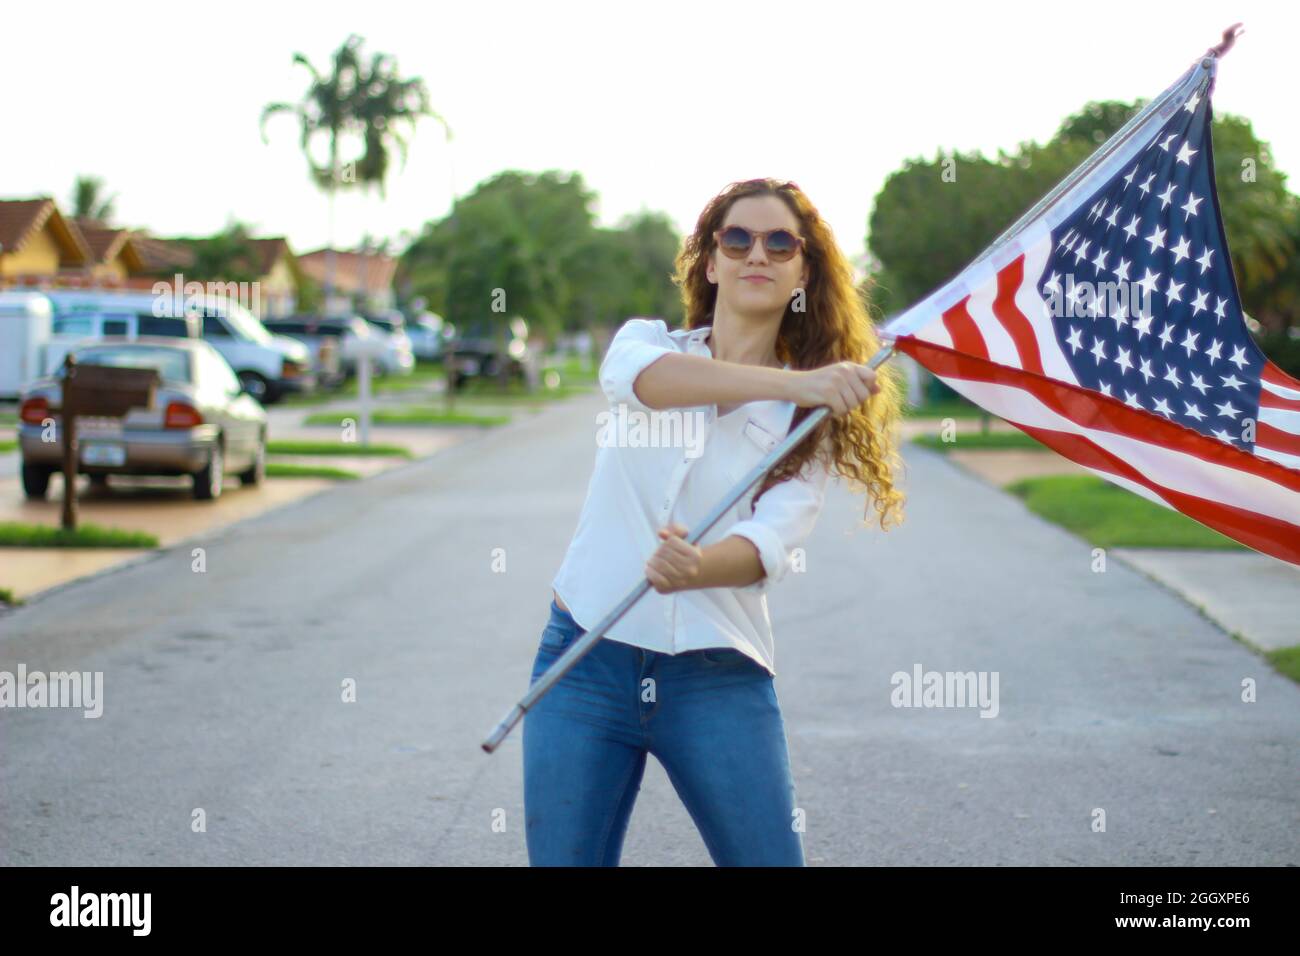 Young redhead Hispanic and Caucasian woman wearing sunglasses waving the American flag outside. Stock Photo